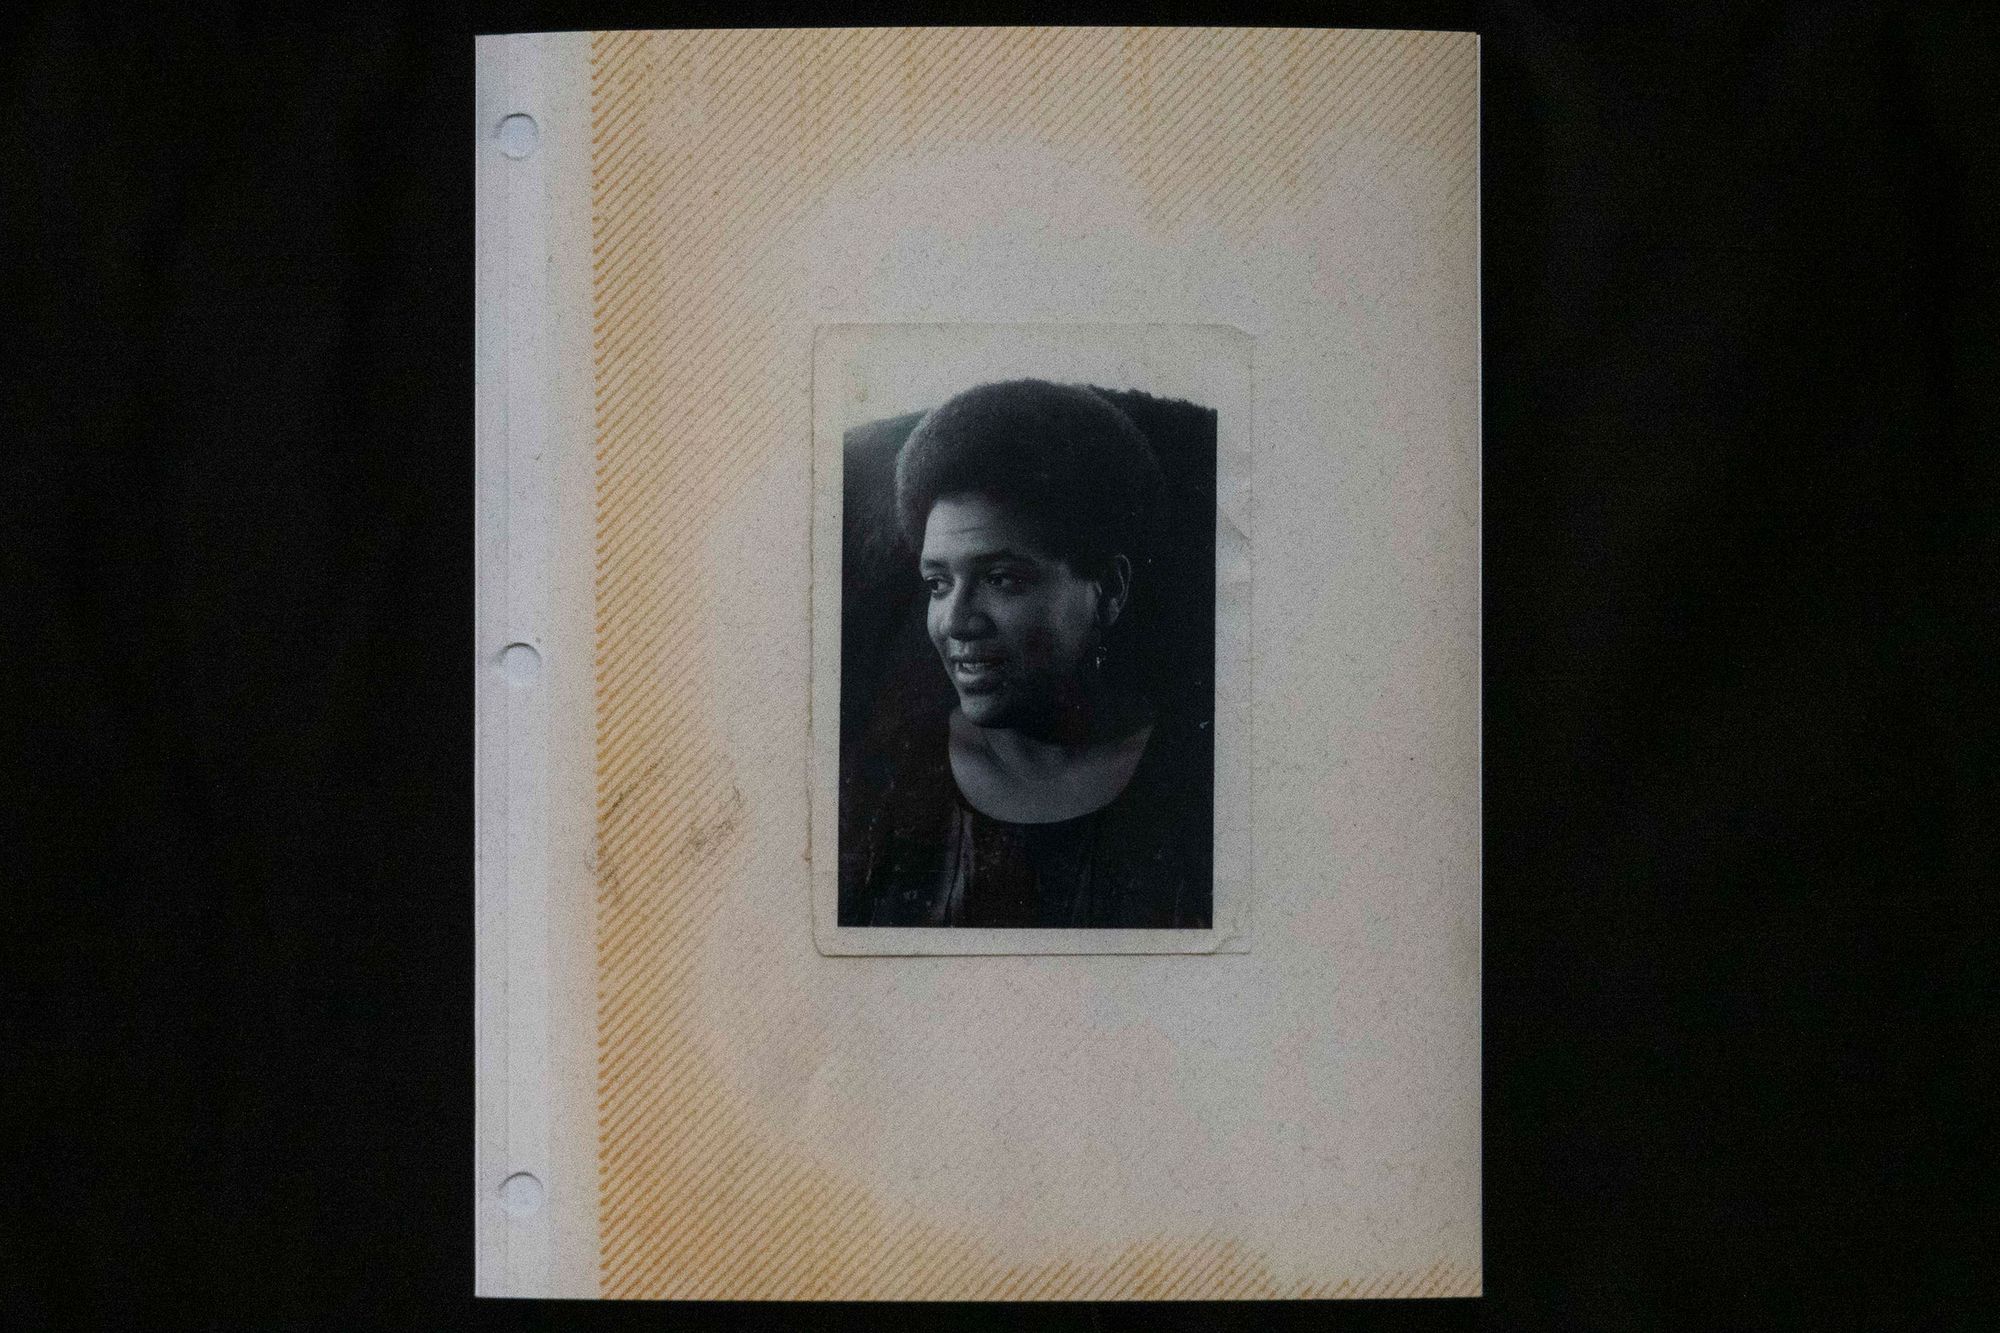 An Unseen Photo Album Preserves Life of Audre Lorde